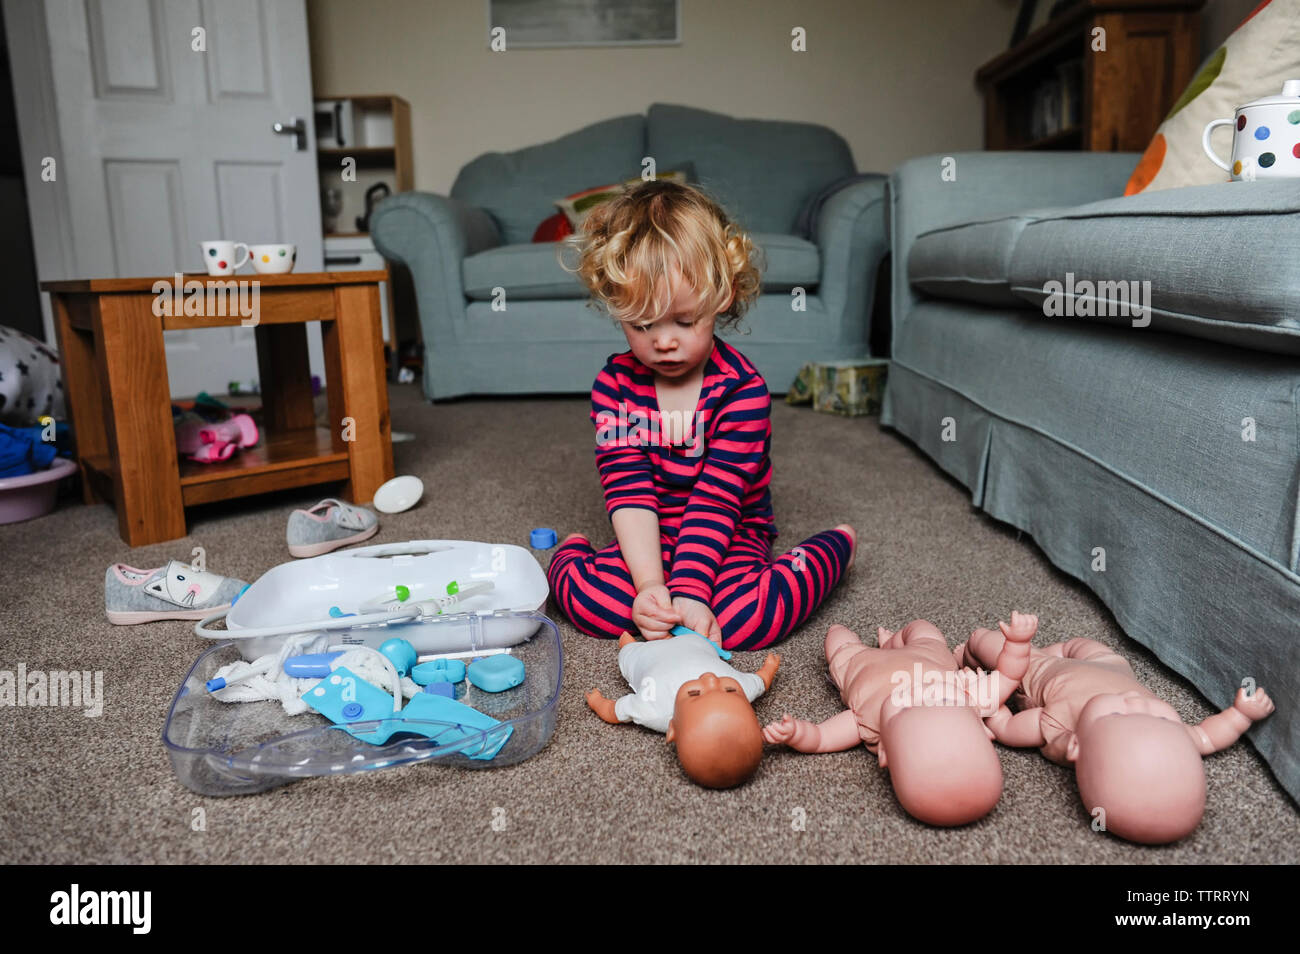 Girl playing with dolls at home Stock Photo